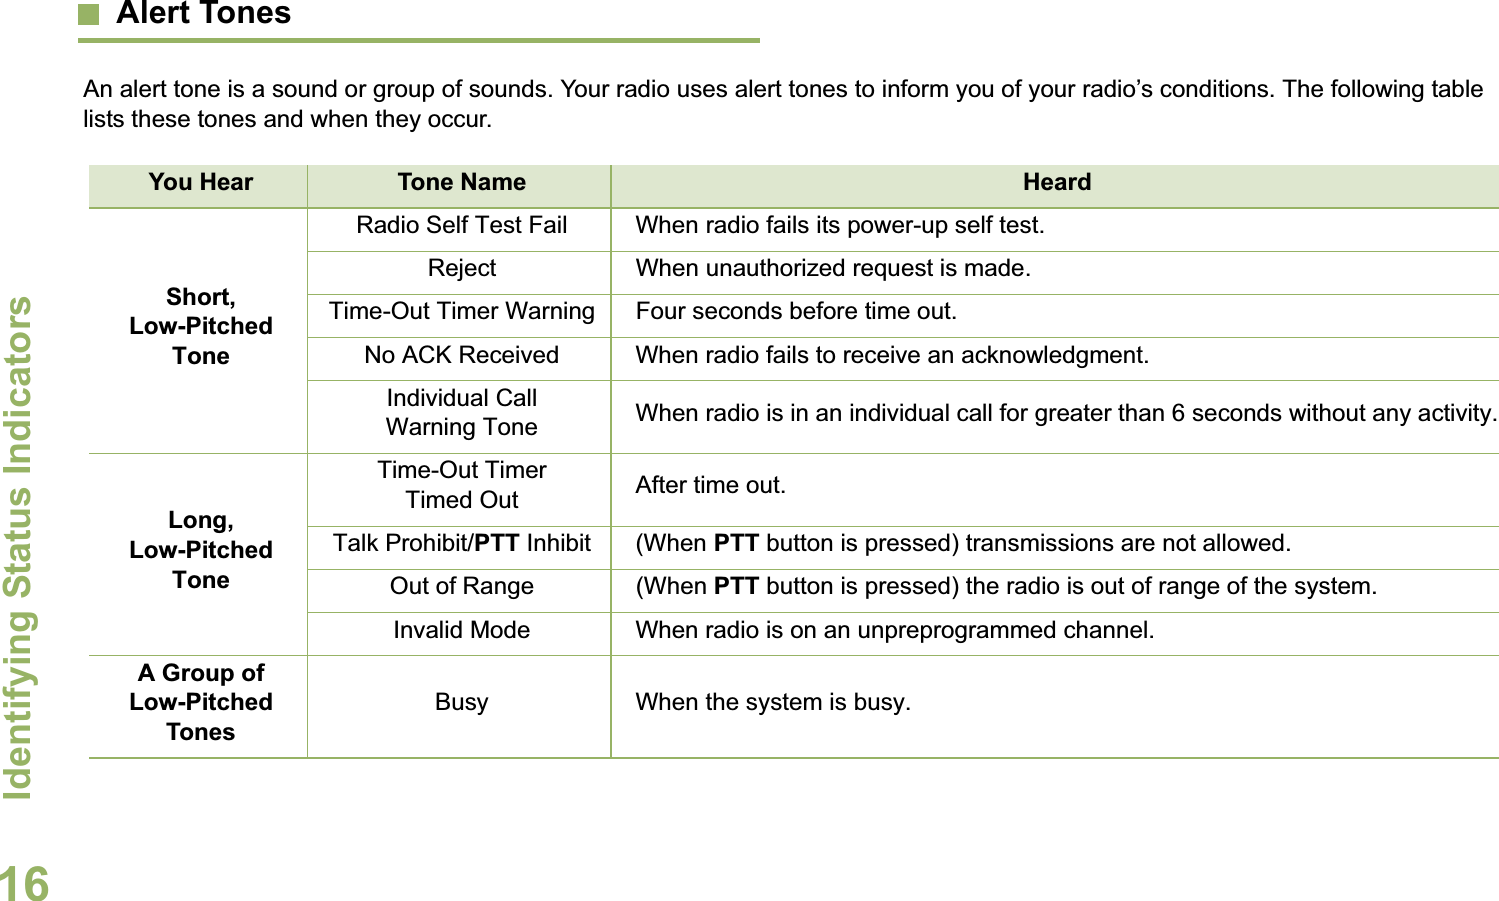 Identifying Status IndicatorsEnglish16Alert TonesAn alert tone is a sound or group of sounds. Your radio uses alert tones to inform you of your radio’s conditions. The following table lists these tones and when they occur.You Hear Tone Name HeardShort, Low-Pitched ToneRadio Self Test Fail When radio fails its power-up self test.Reject When unauthorized request is made.Time-Out Timer Warning Four seconds before time out.No ACK Received When radio fails to receive an acknowledgment.Individual Call Warning Tone When radio is in an individual call for greater than 6 seconds without any activity.Long, Low-Pitched ToneTime-Out Timer Timed Out After time out.Talk Prohibit/PTT Inhibit (When PTT button is pressed) transmissions are not allowed.Out of Range (When PTT button is pressed) the radio is out of range of the system.Invalid Mode When radio is on an unpreprogrammed channel.A Group of Low-Pitched TonesBusy When the system is busy.